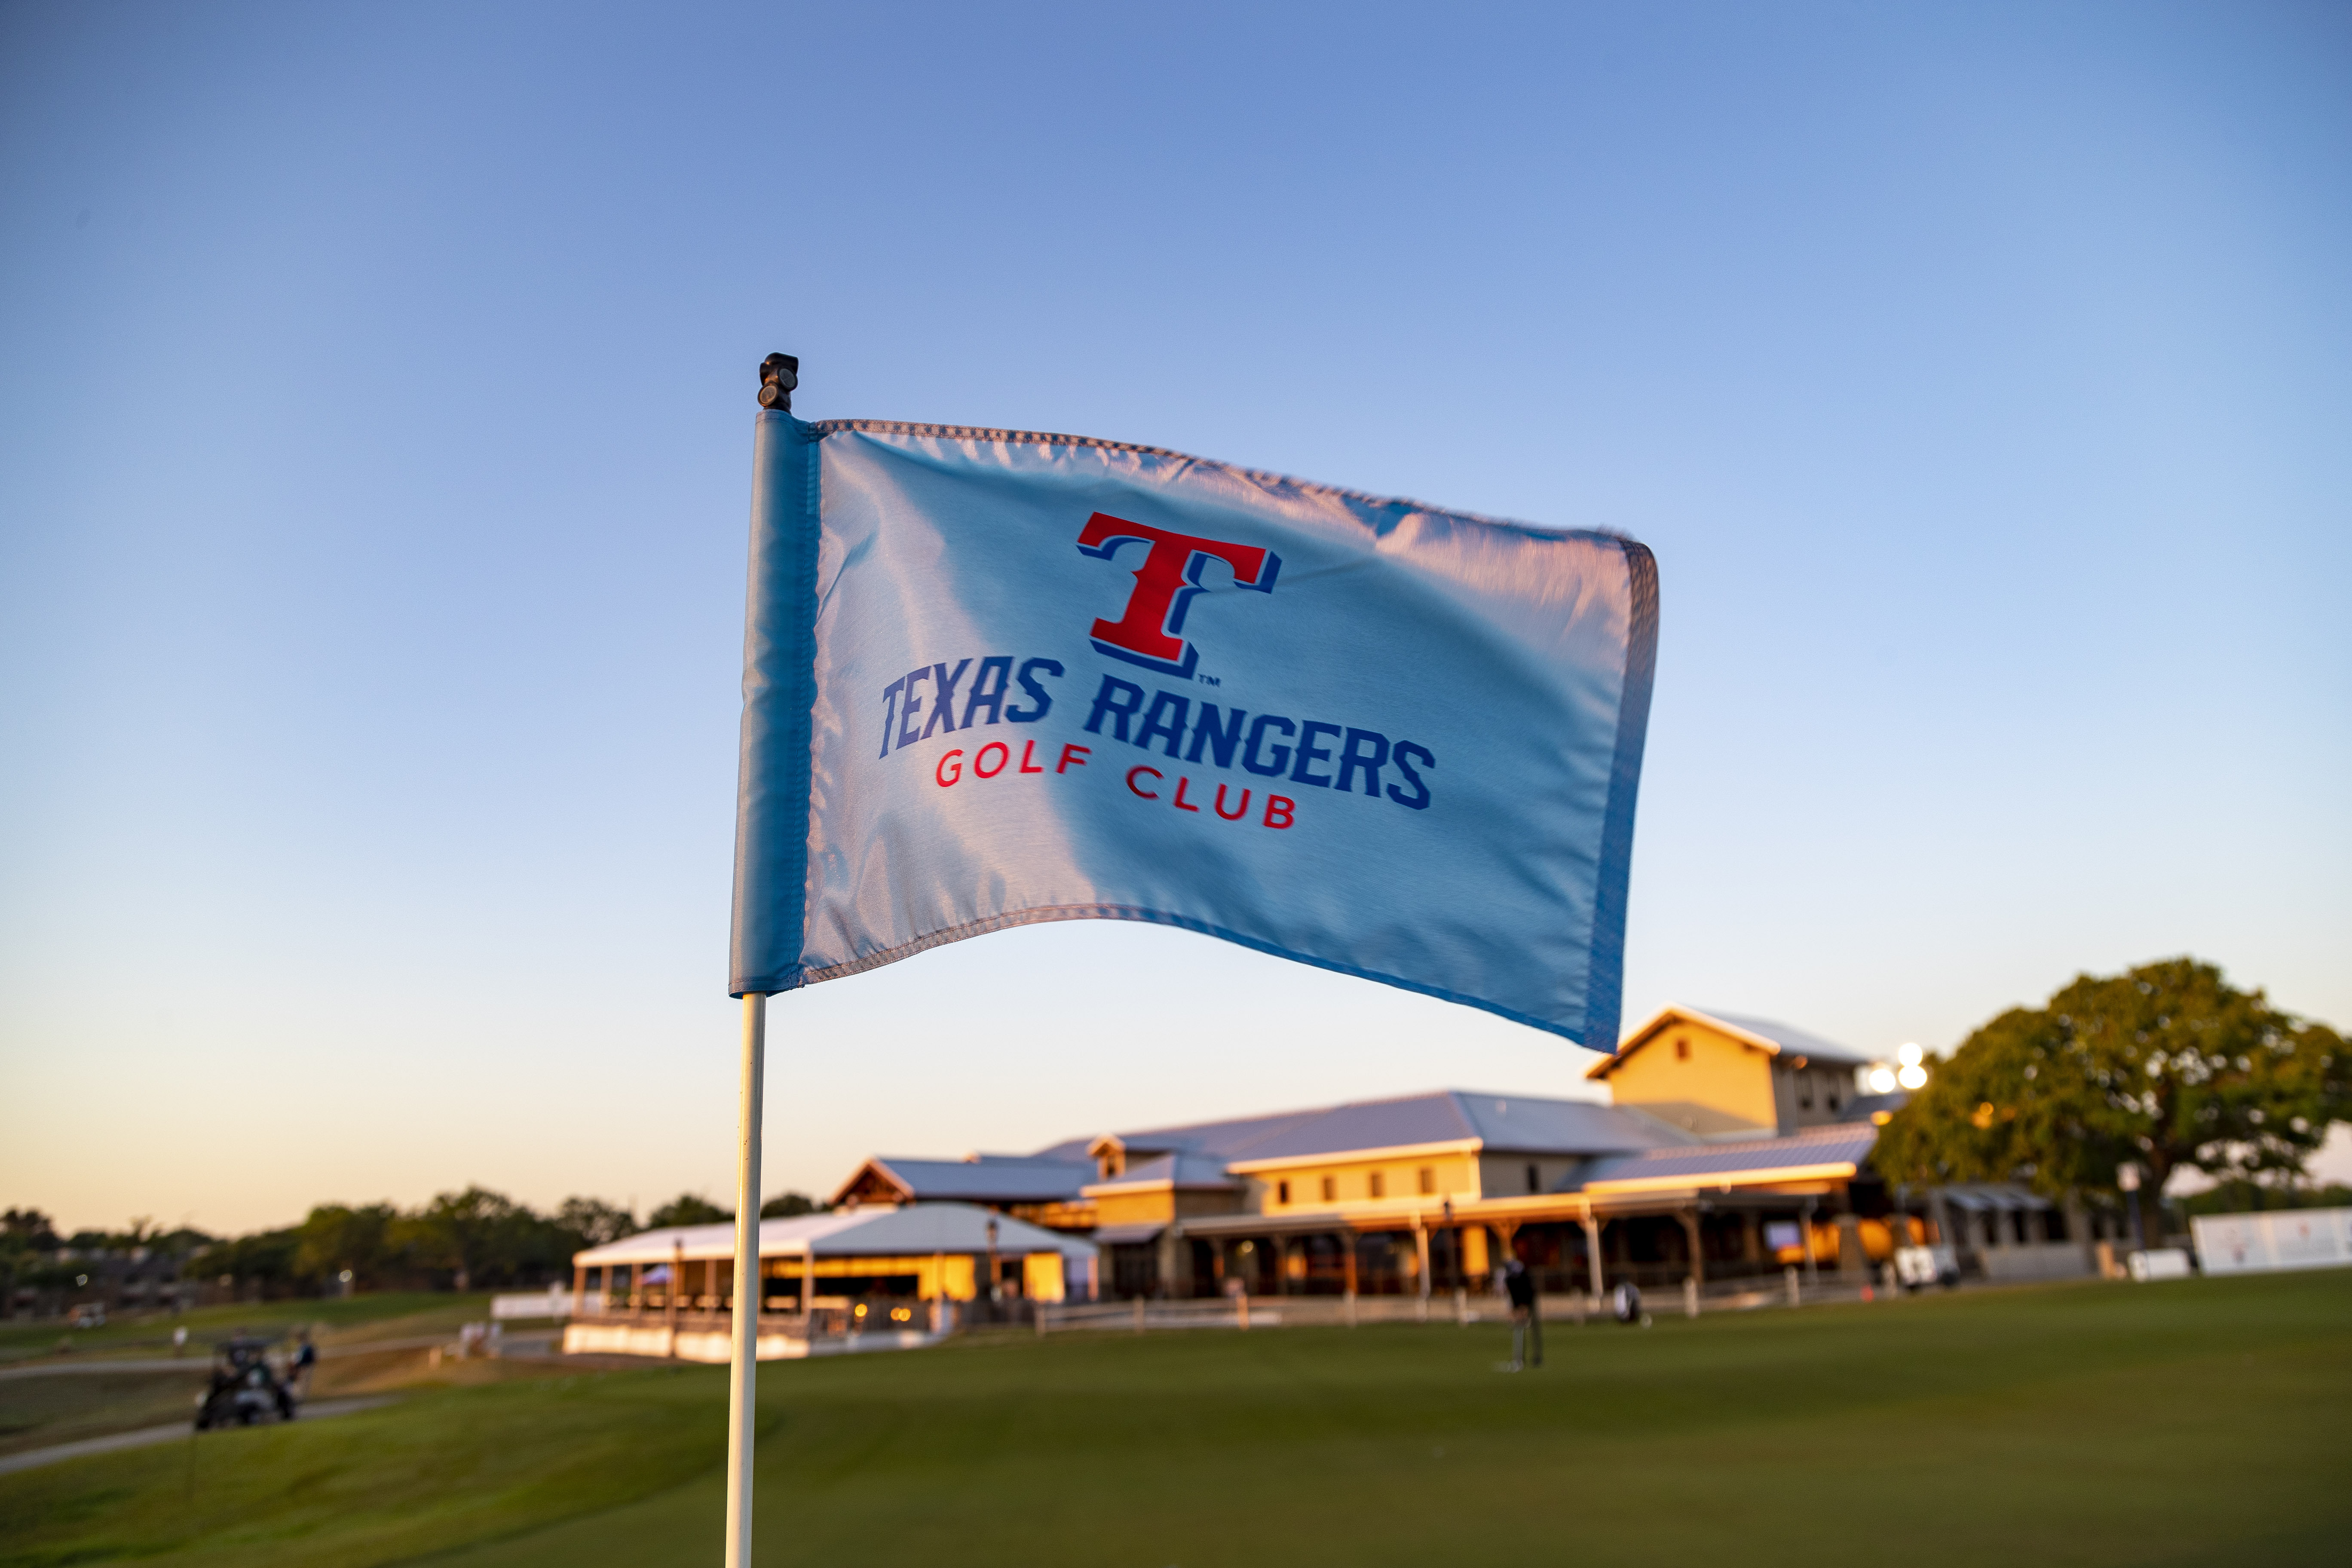 Best Golf Courses You Can Play in Dallas